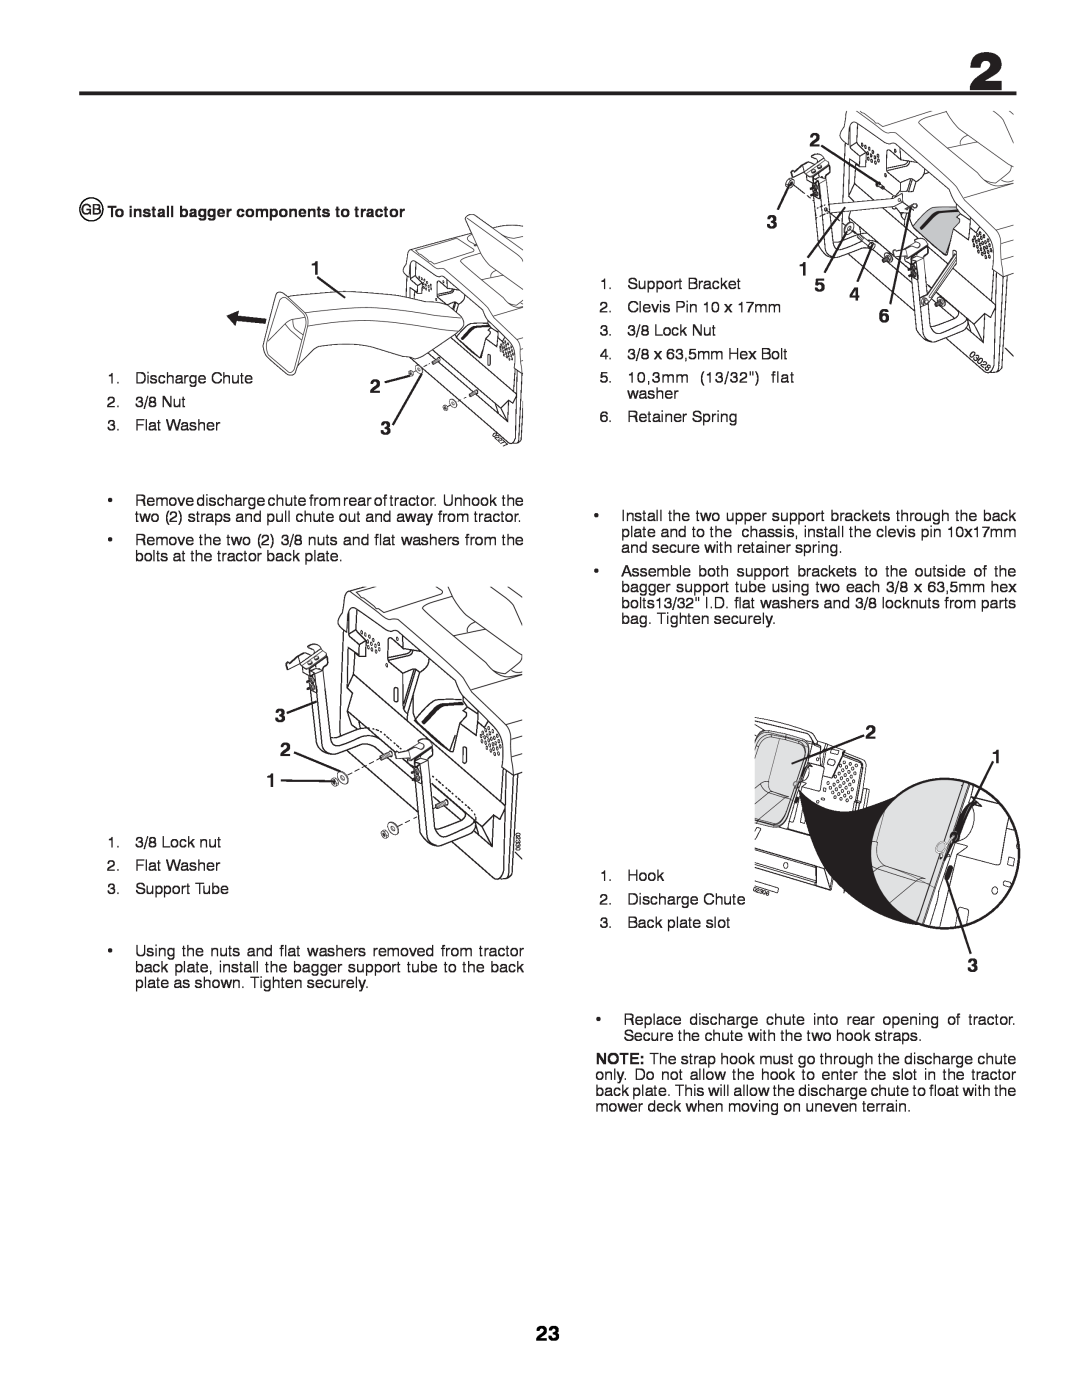 Husqvarna CTH180 TWIN, CTH200 TWIN instruction manual To install bagger components to tractor, Discharge Chute 